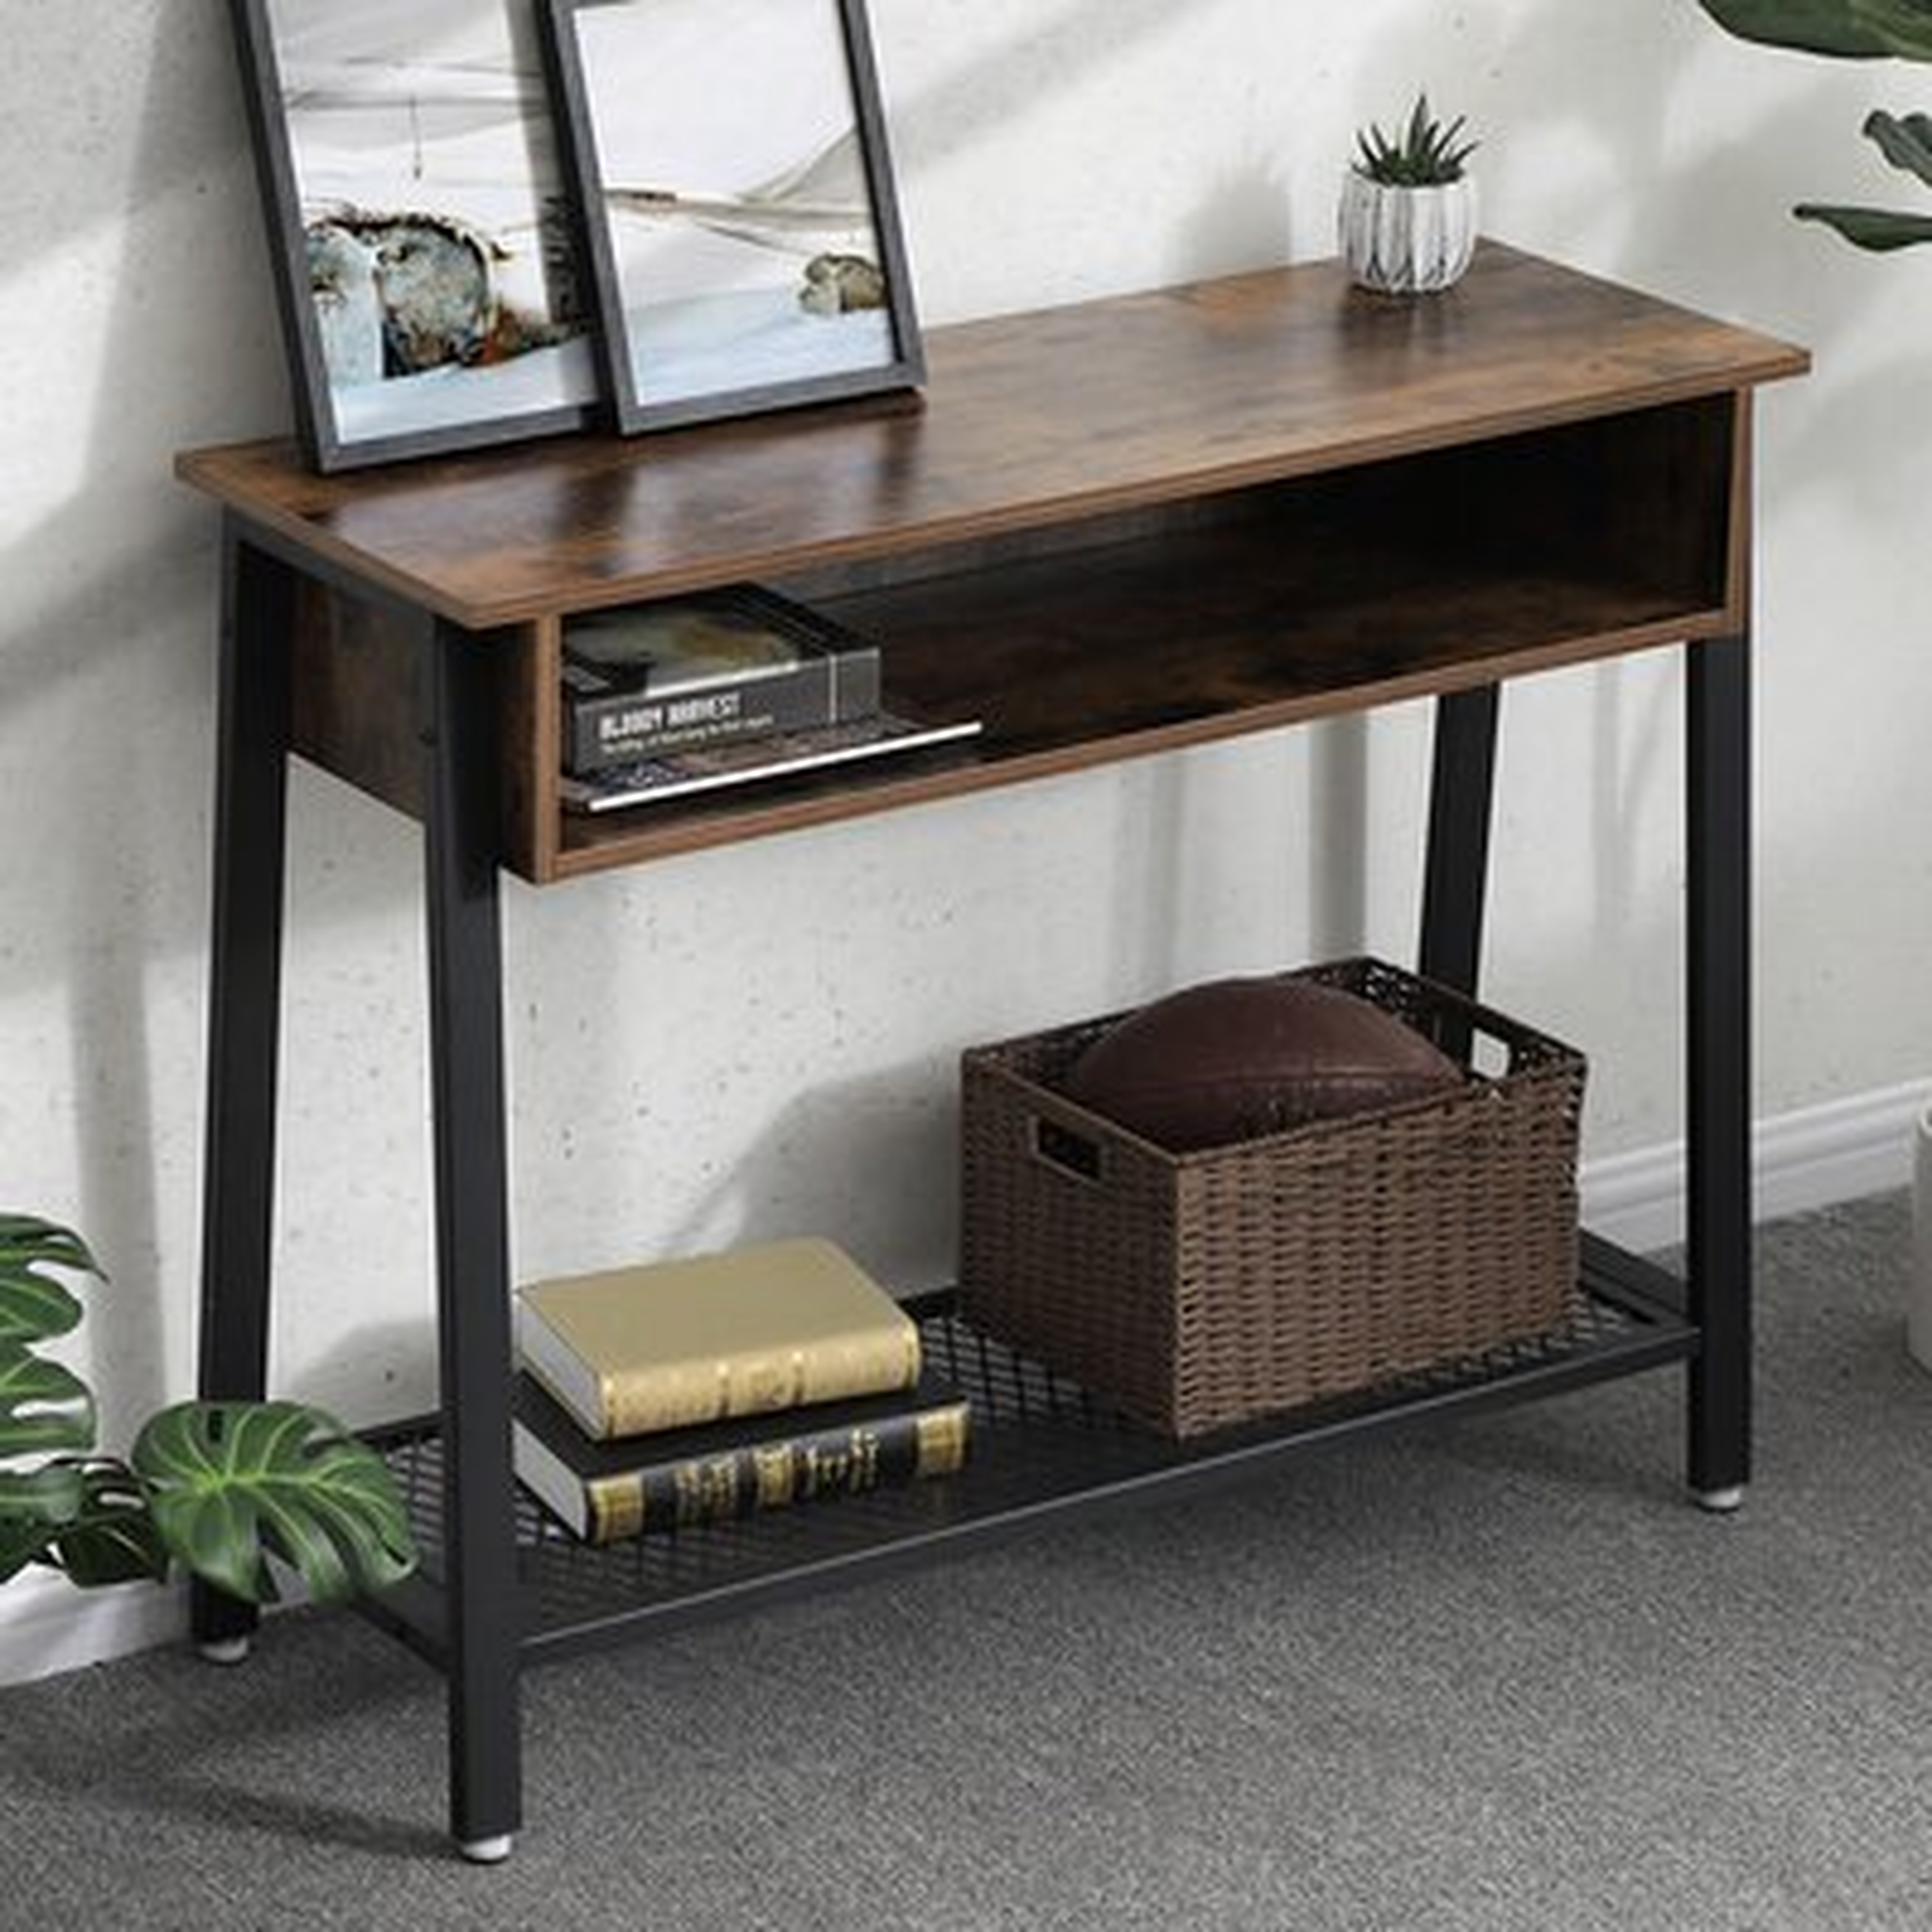 Candleick 39.3" Console Table - Wayfair